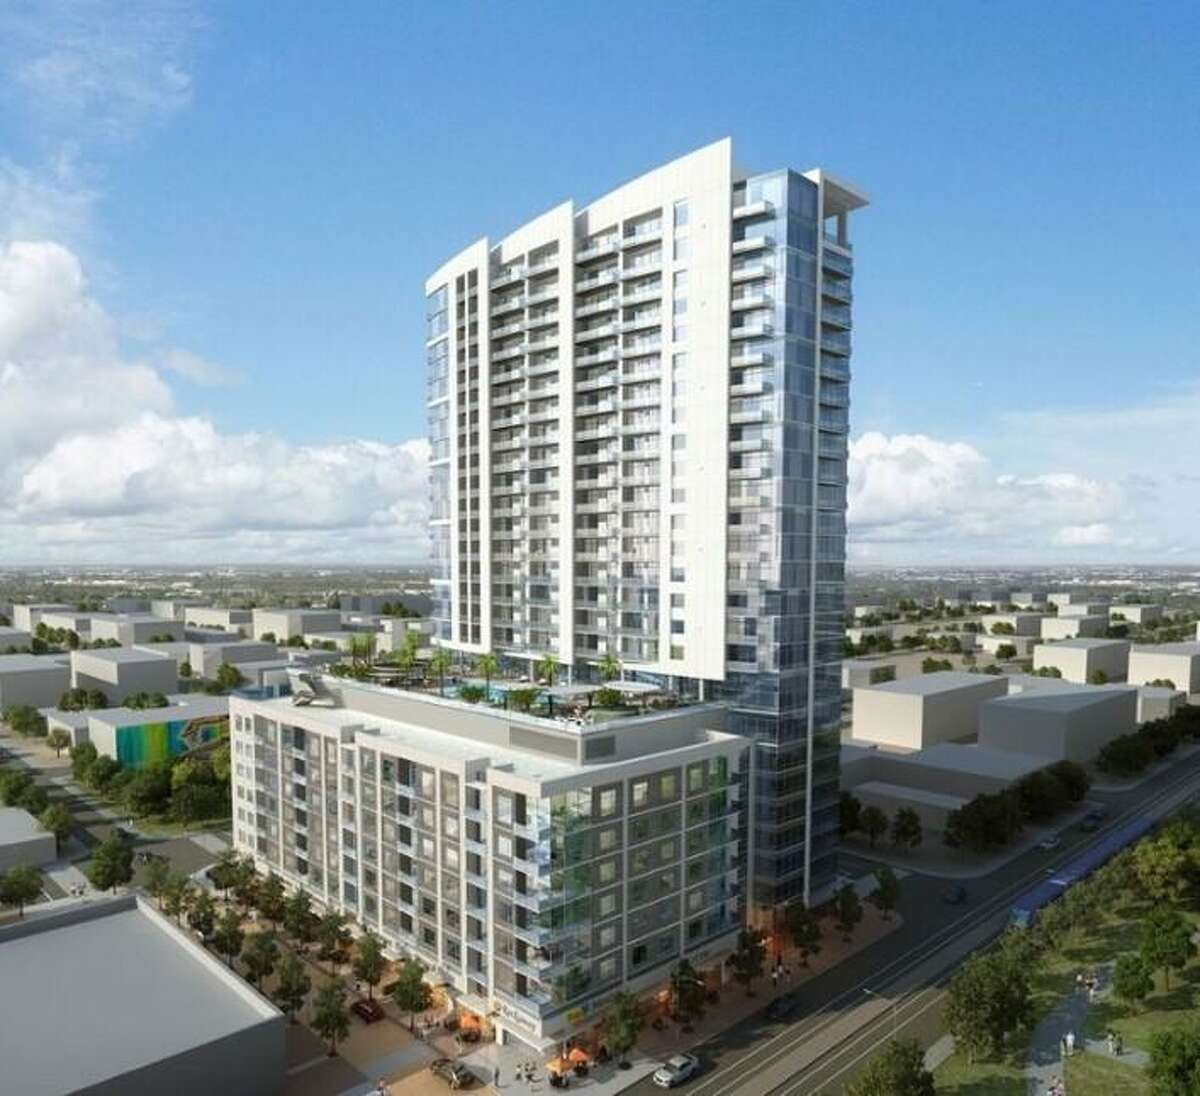 Caydon, a privately owned Australian company, will open a 27-story residential tower at 2850 Fannin in 2019. >>Take a peek inside other luxury apartments in Houston...